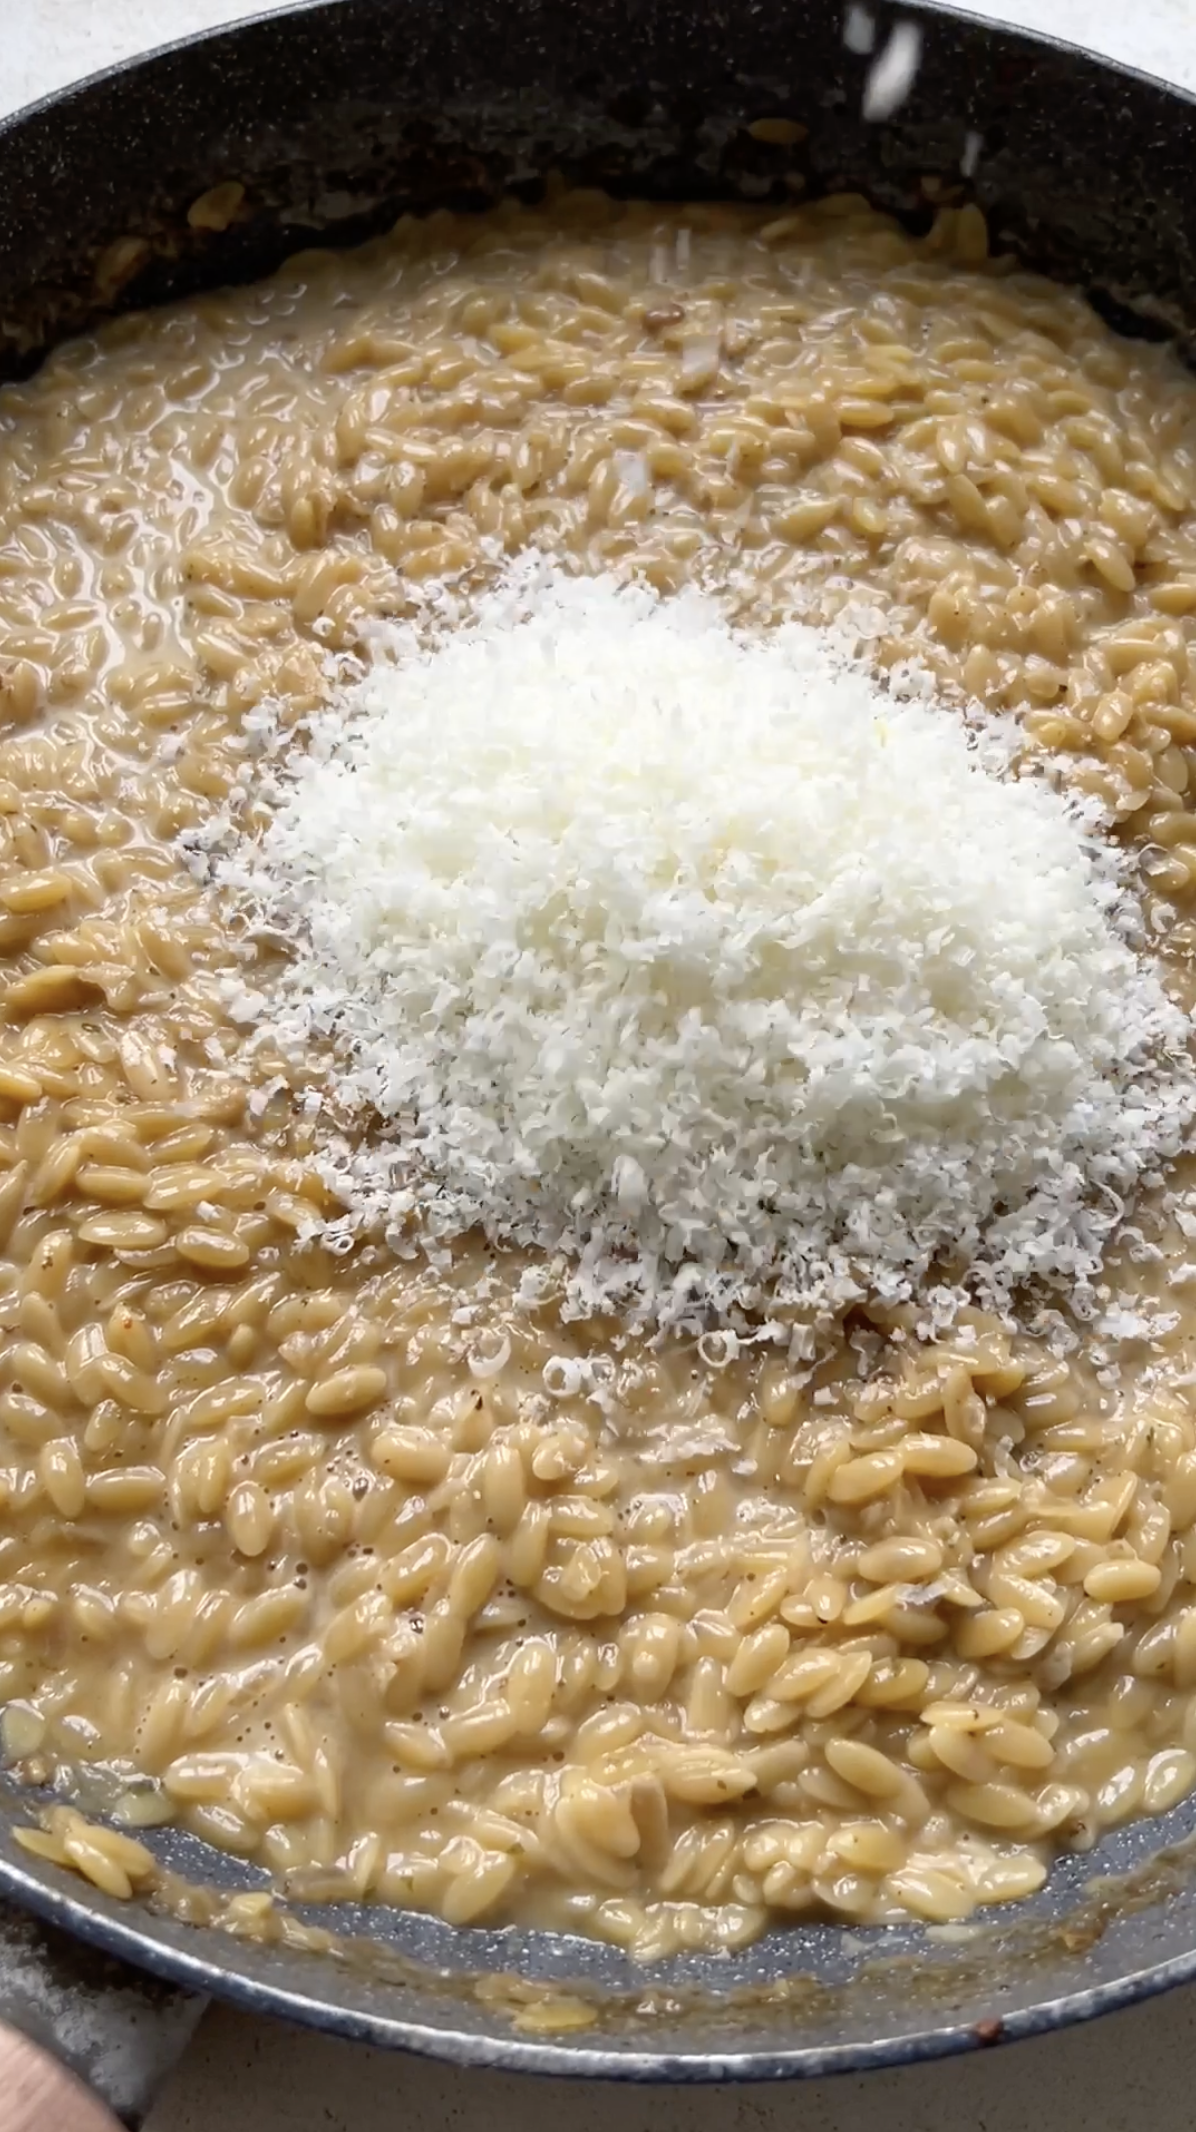 Freshly grated Parmesan cheese added to pasta.